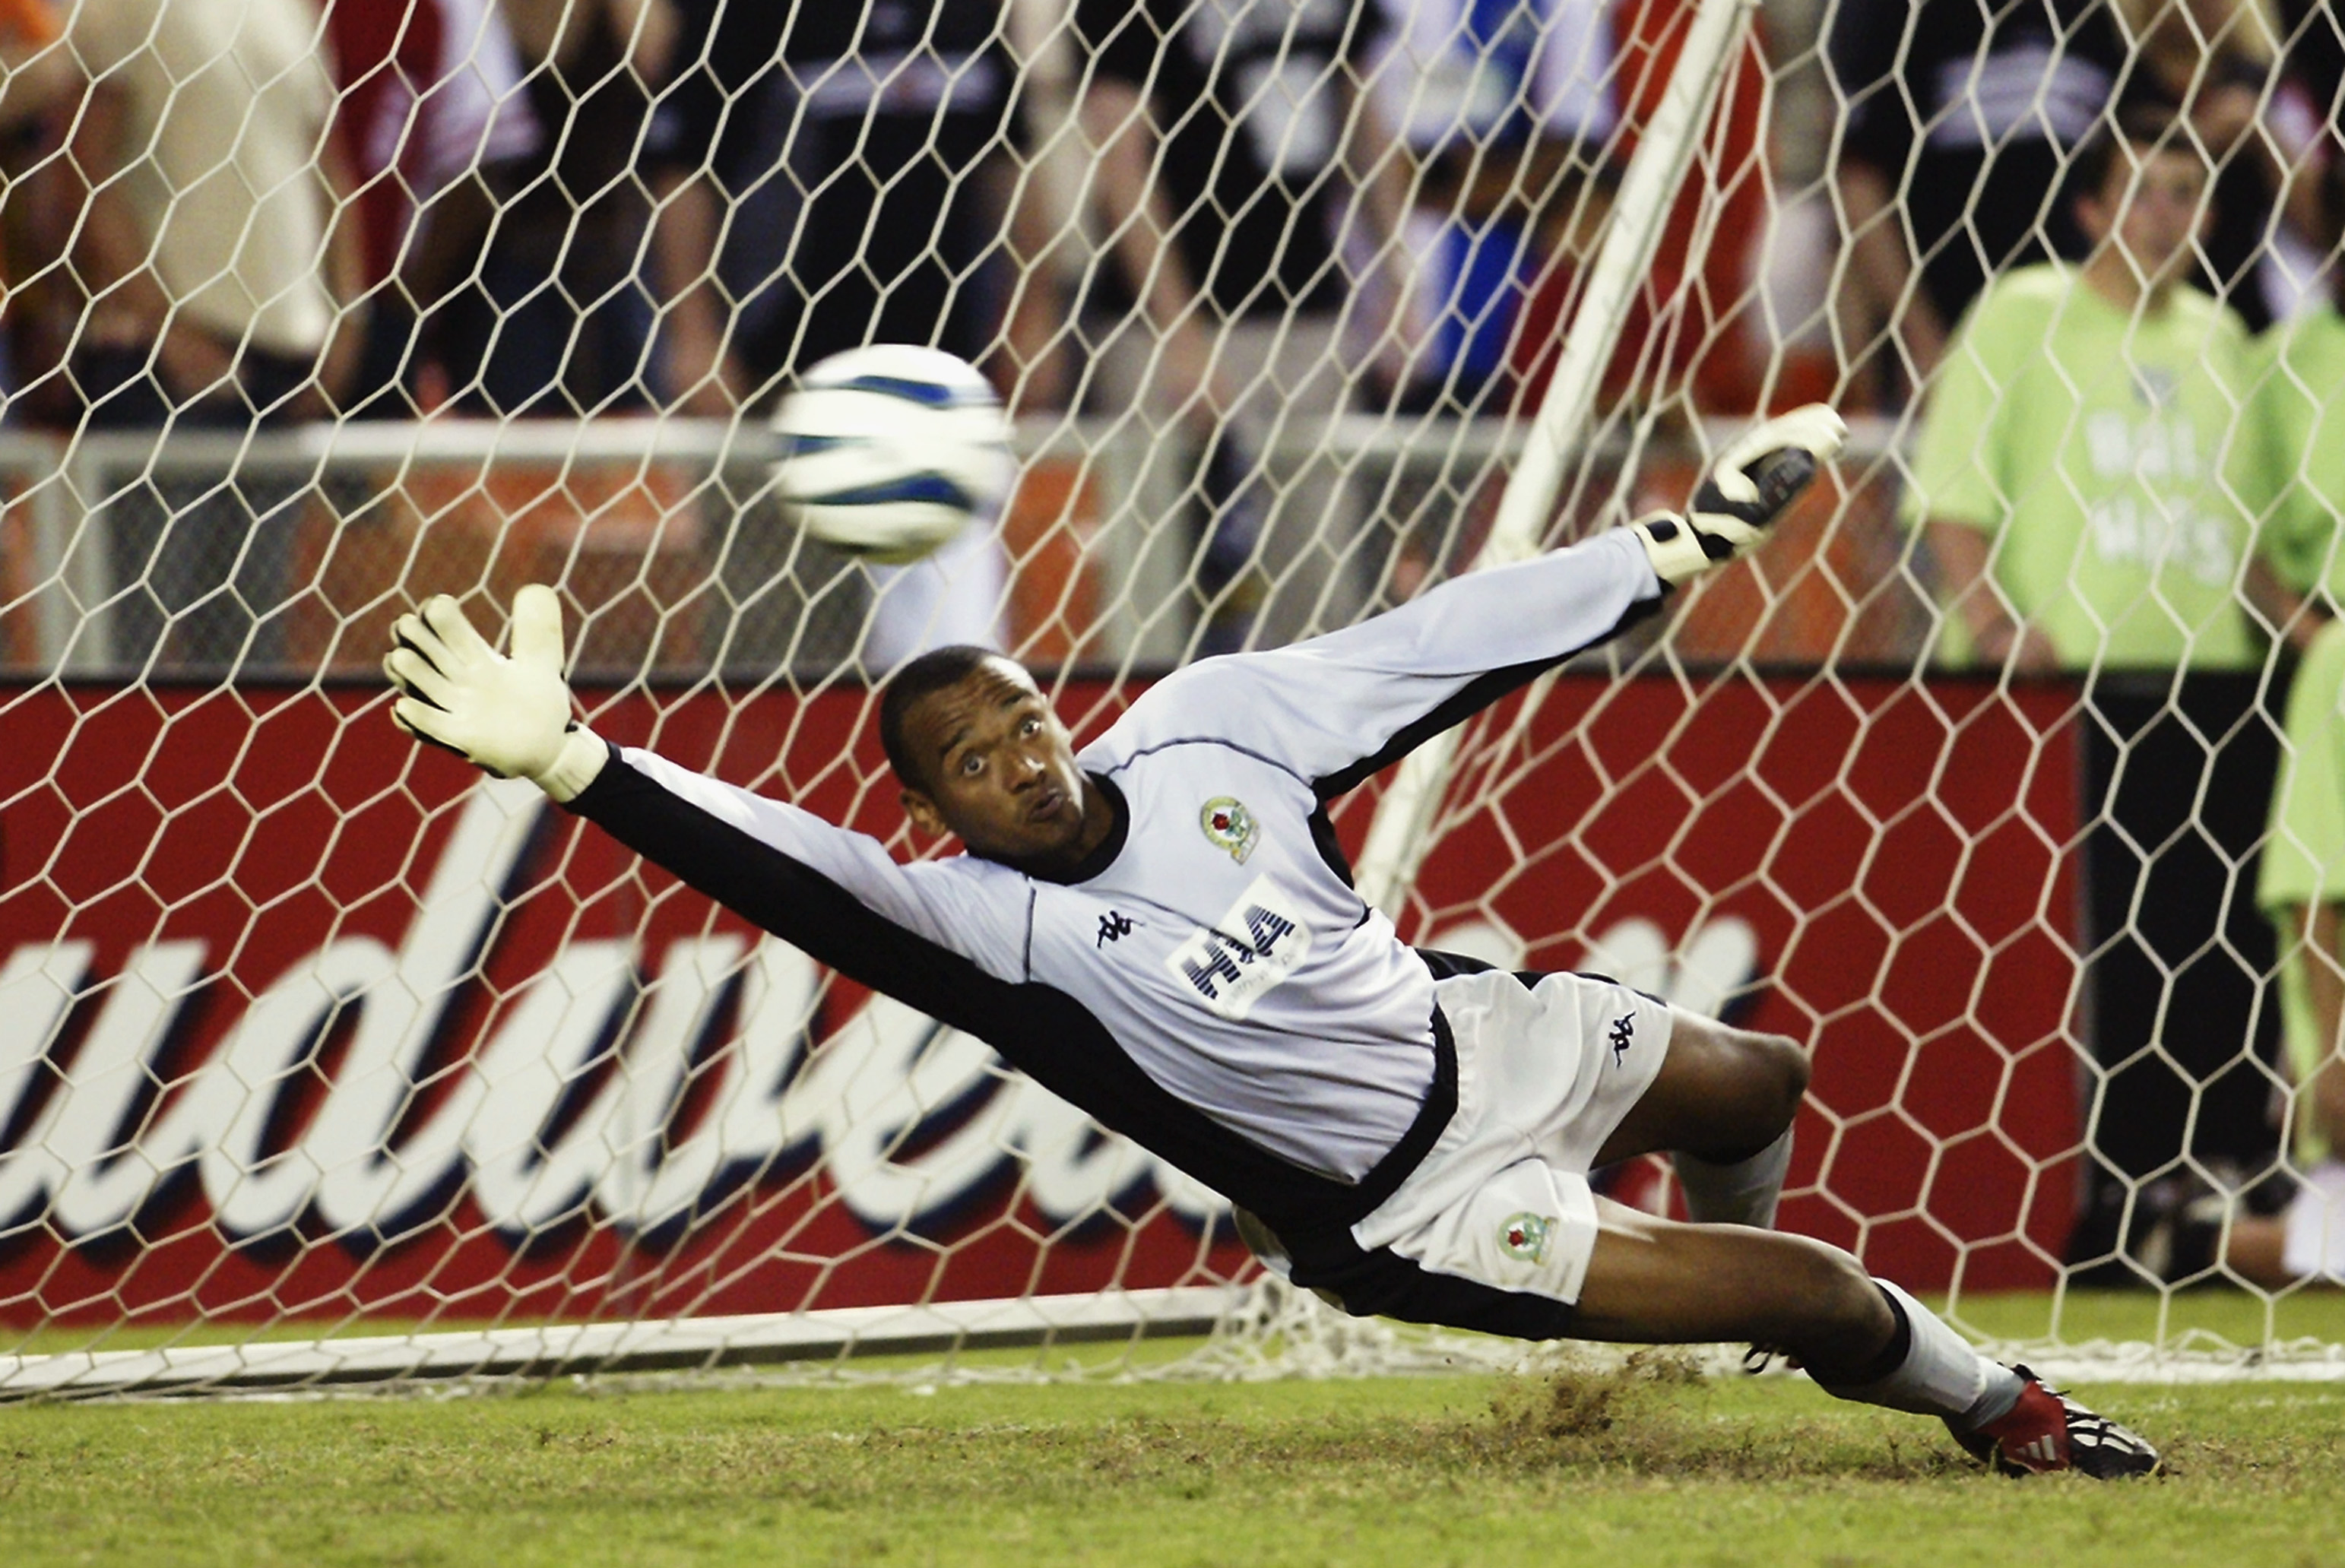 WASHINGTON - JULY 23:  David Yelldell of Blackburn Rovers makes a save during the Pre-Season Friendly match between DC United and Blackburn Rovers held on July 23, 2003 at the RFK Stadium, in Washington DC. The match ended in a 1-1 draw, DC United won the